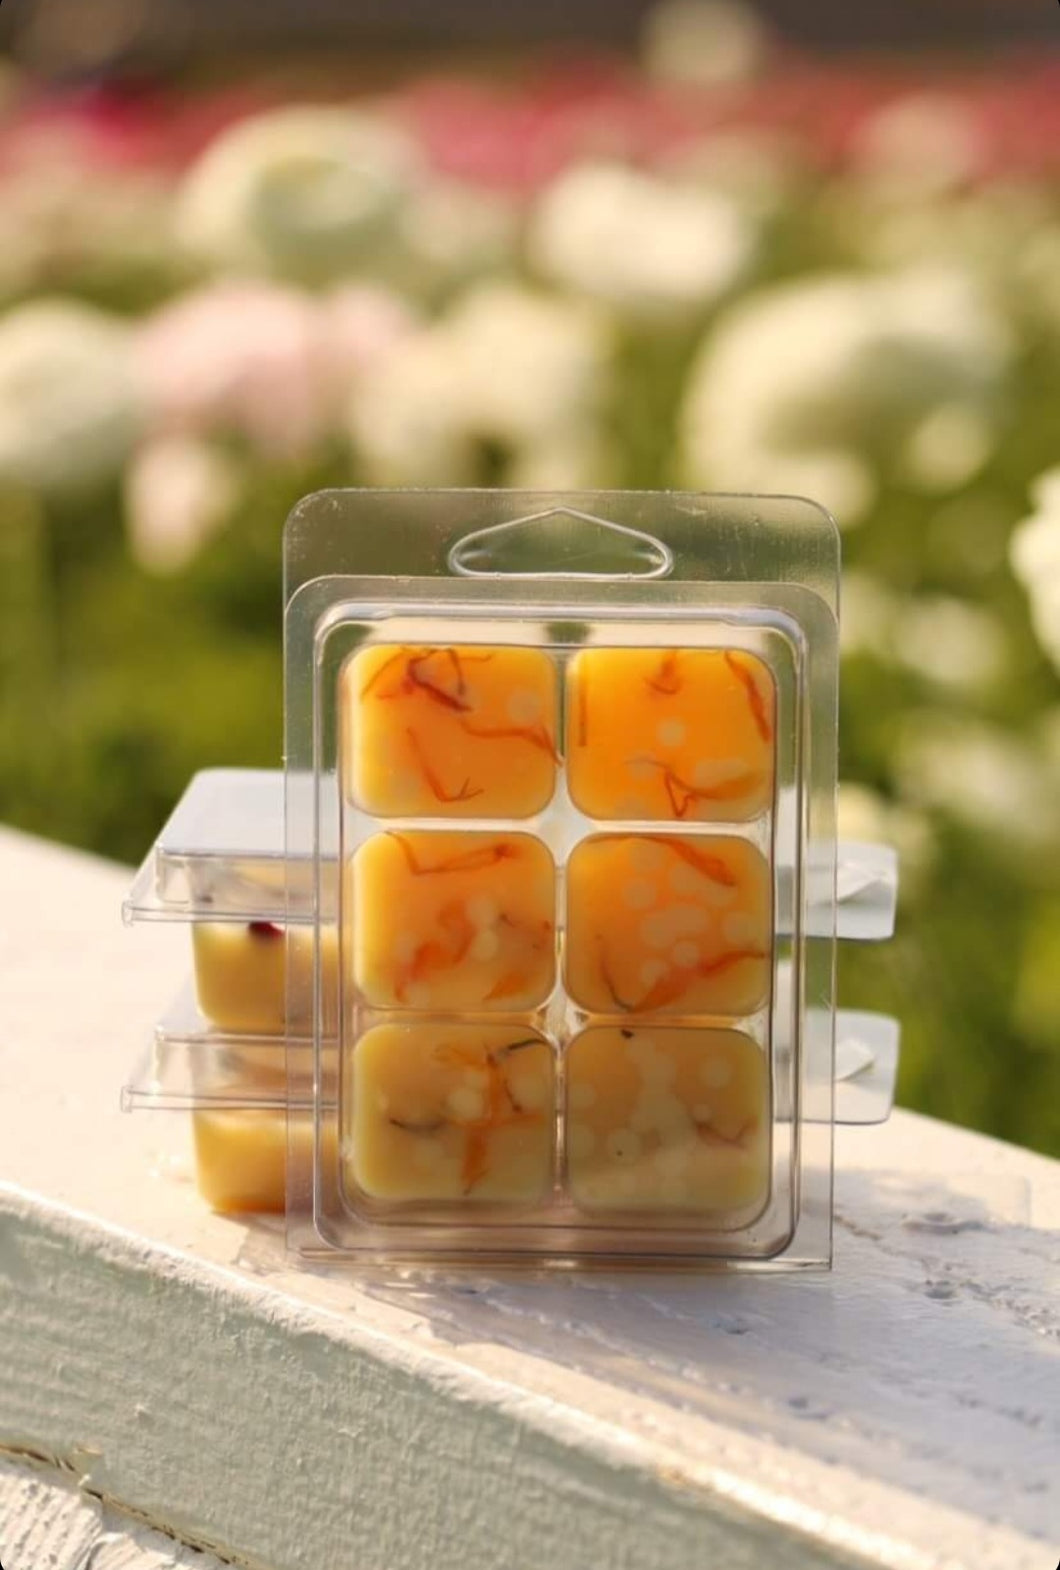 The Body Collection - Bath Melts